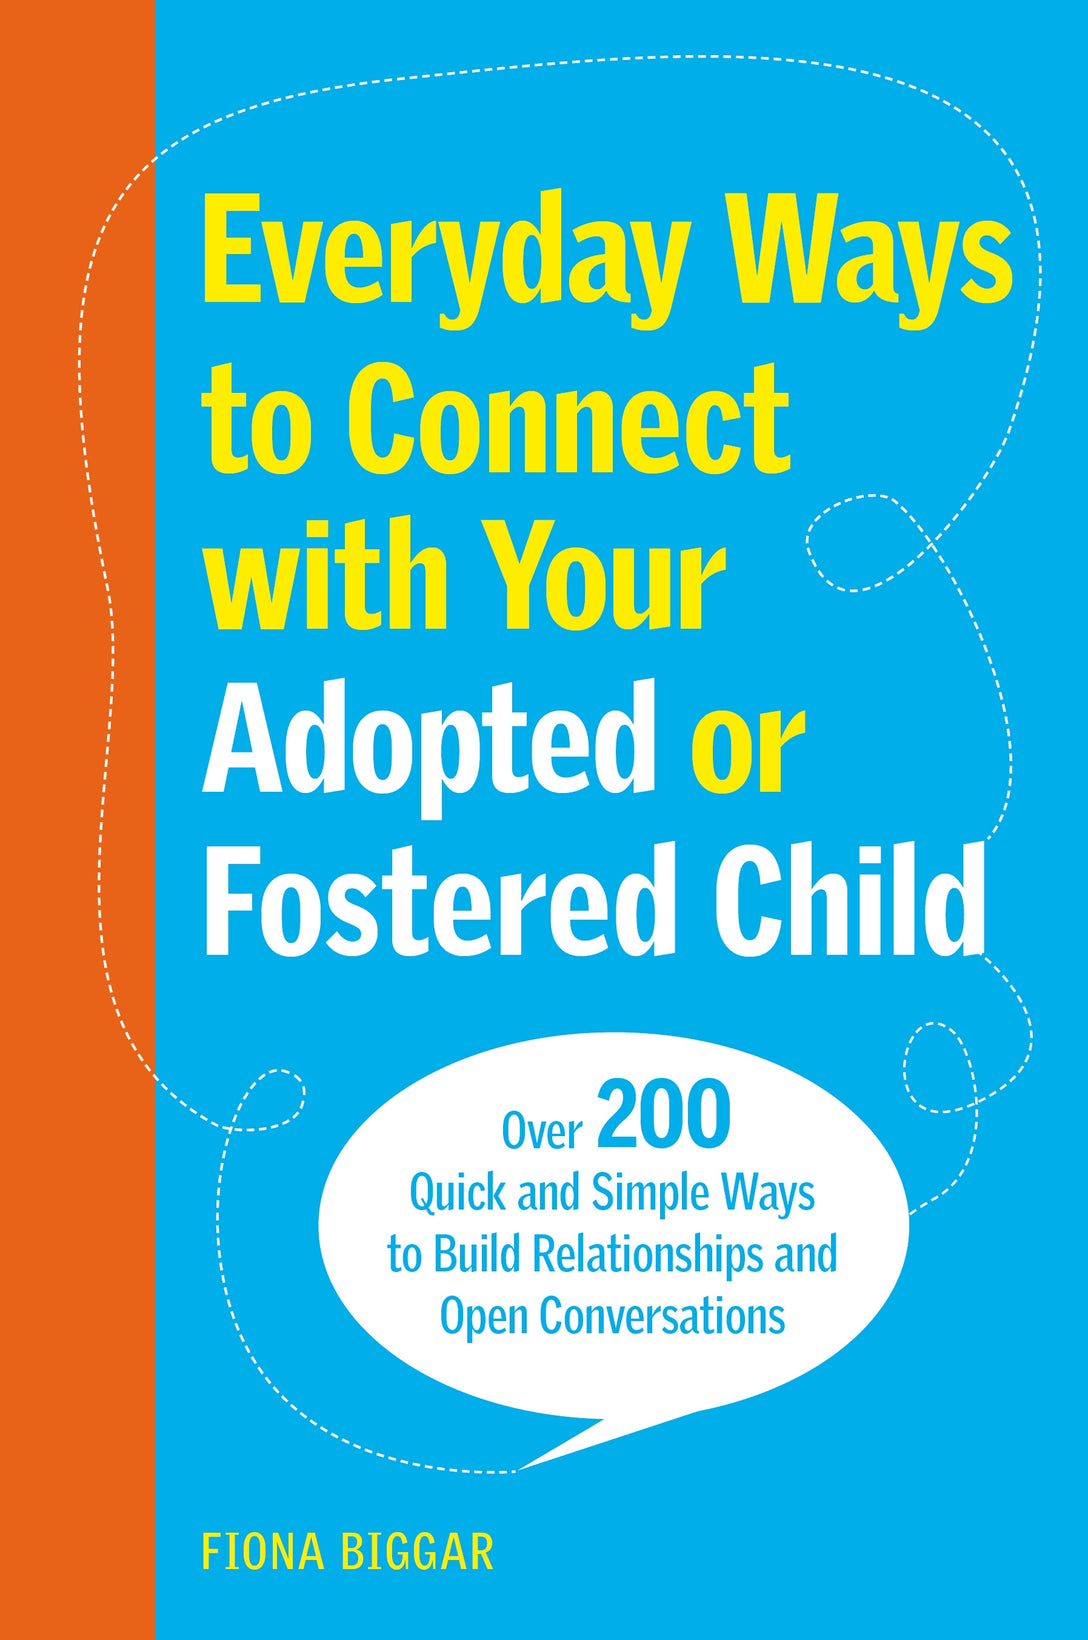 Everyday Ways to Connect with Your Adopted or Fostered Child by Fiona Biggar